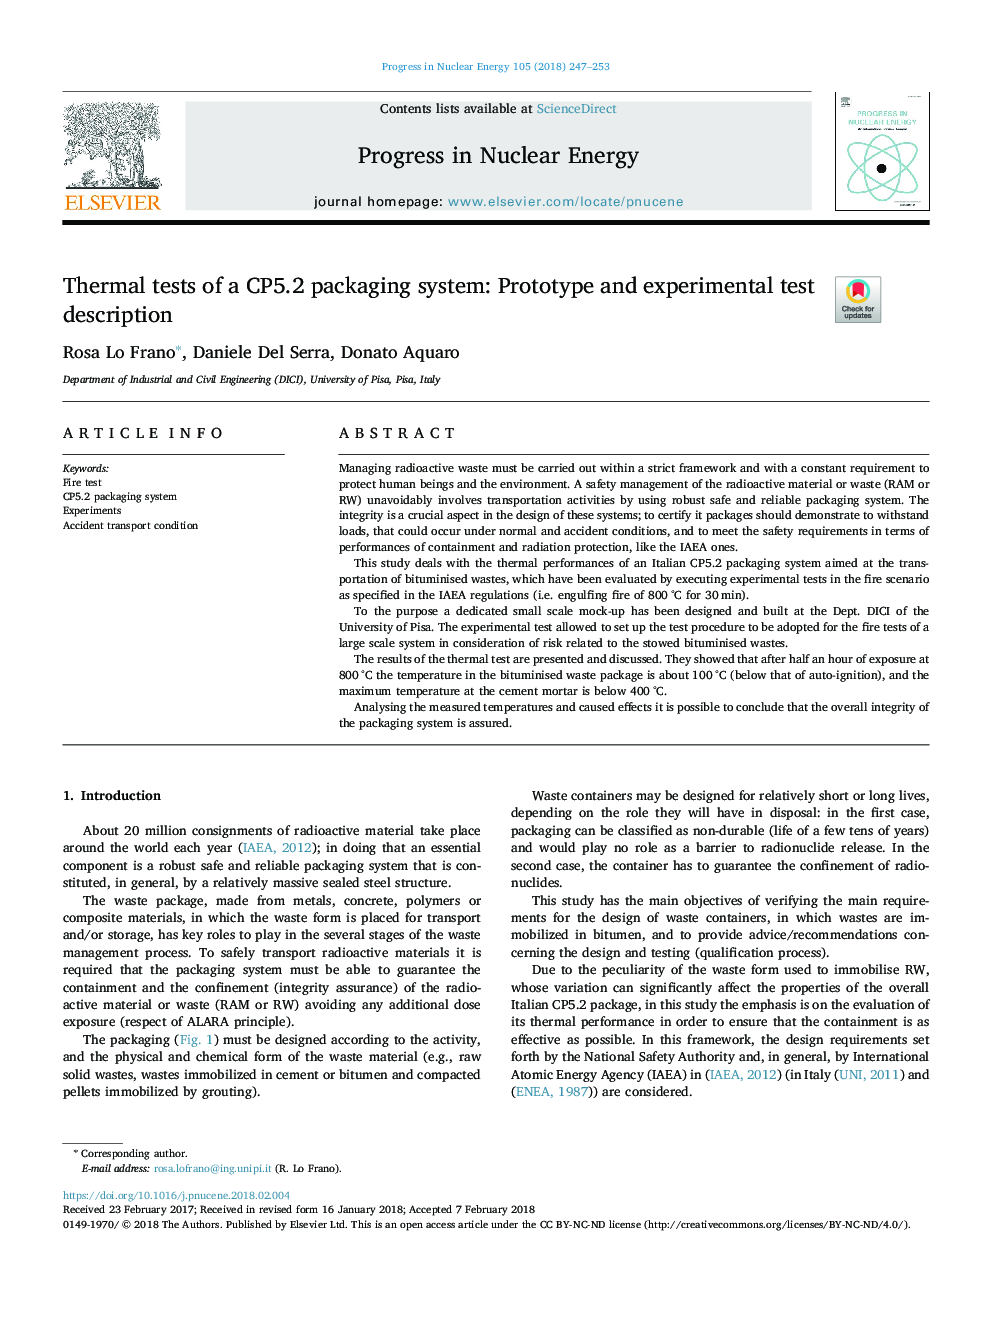 Thermal tests of a CP5.2 packaging system: Prototype and experimental test description